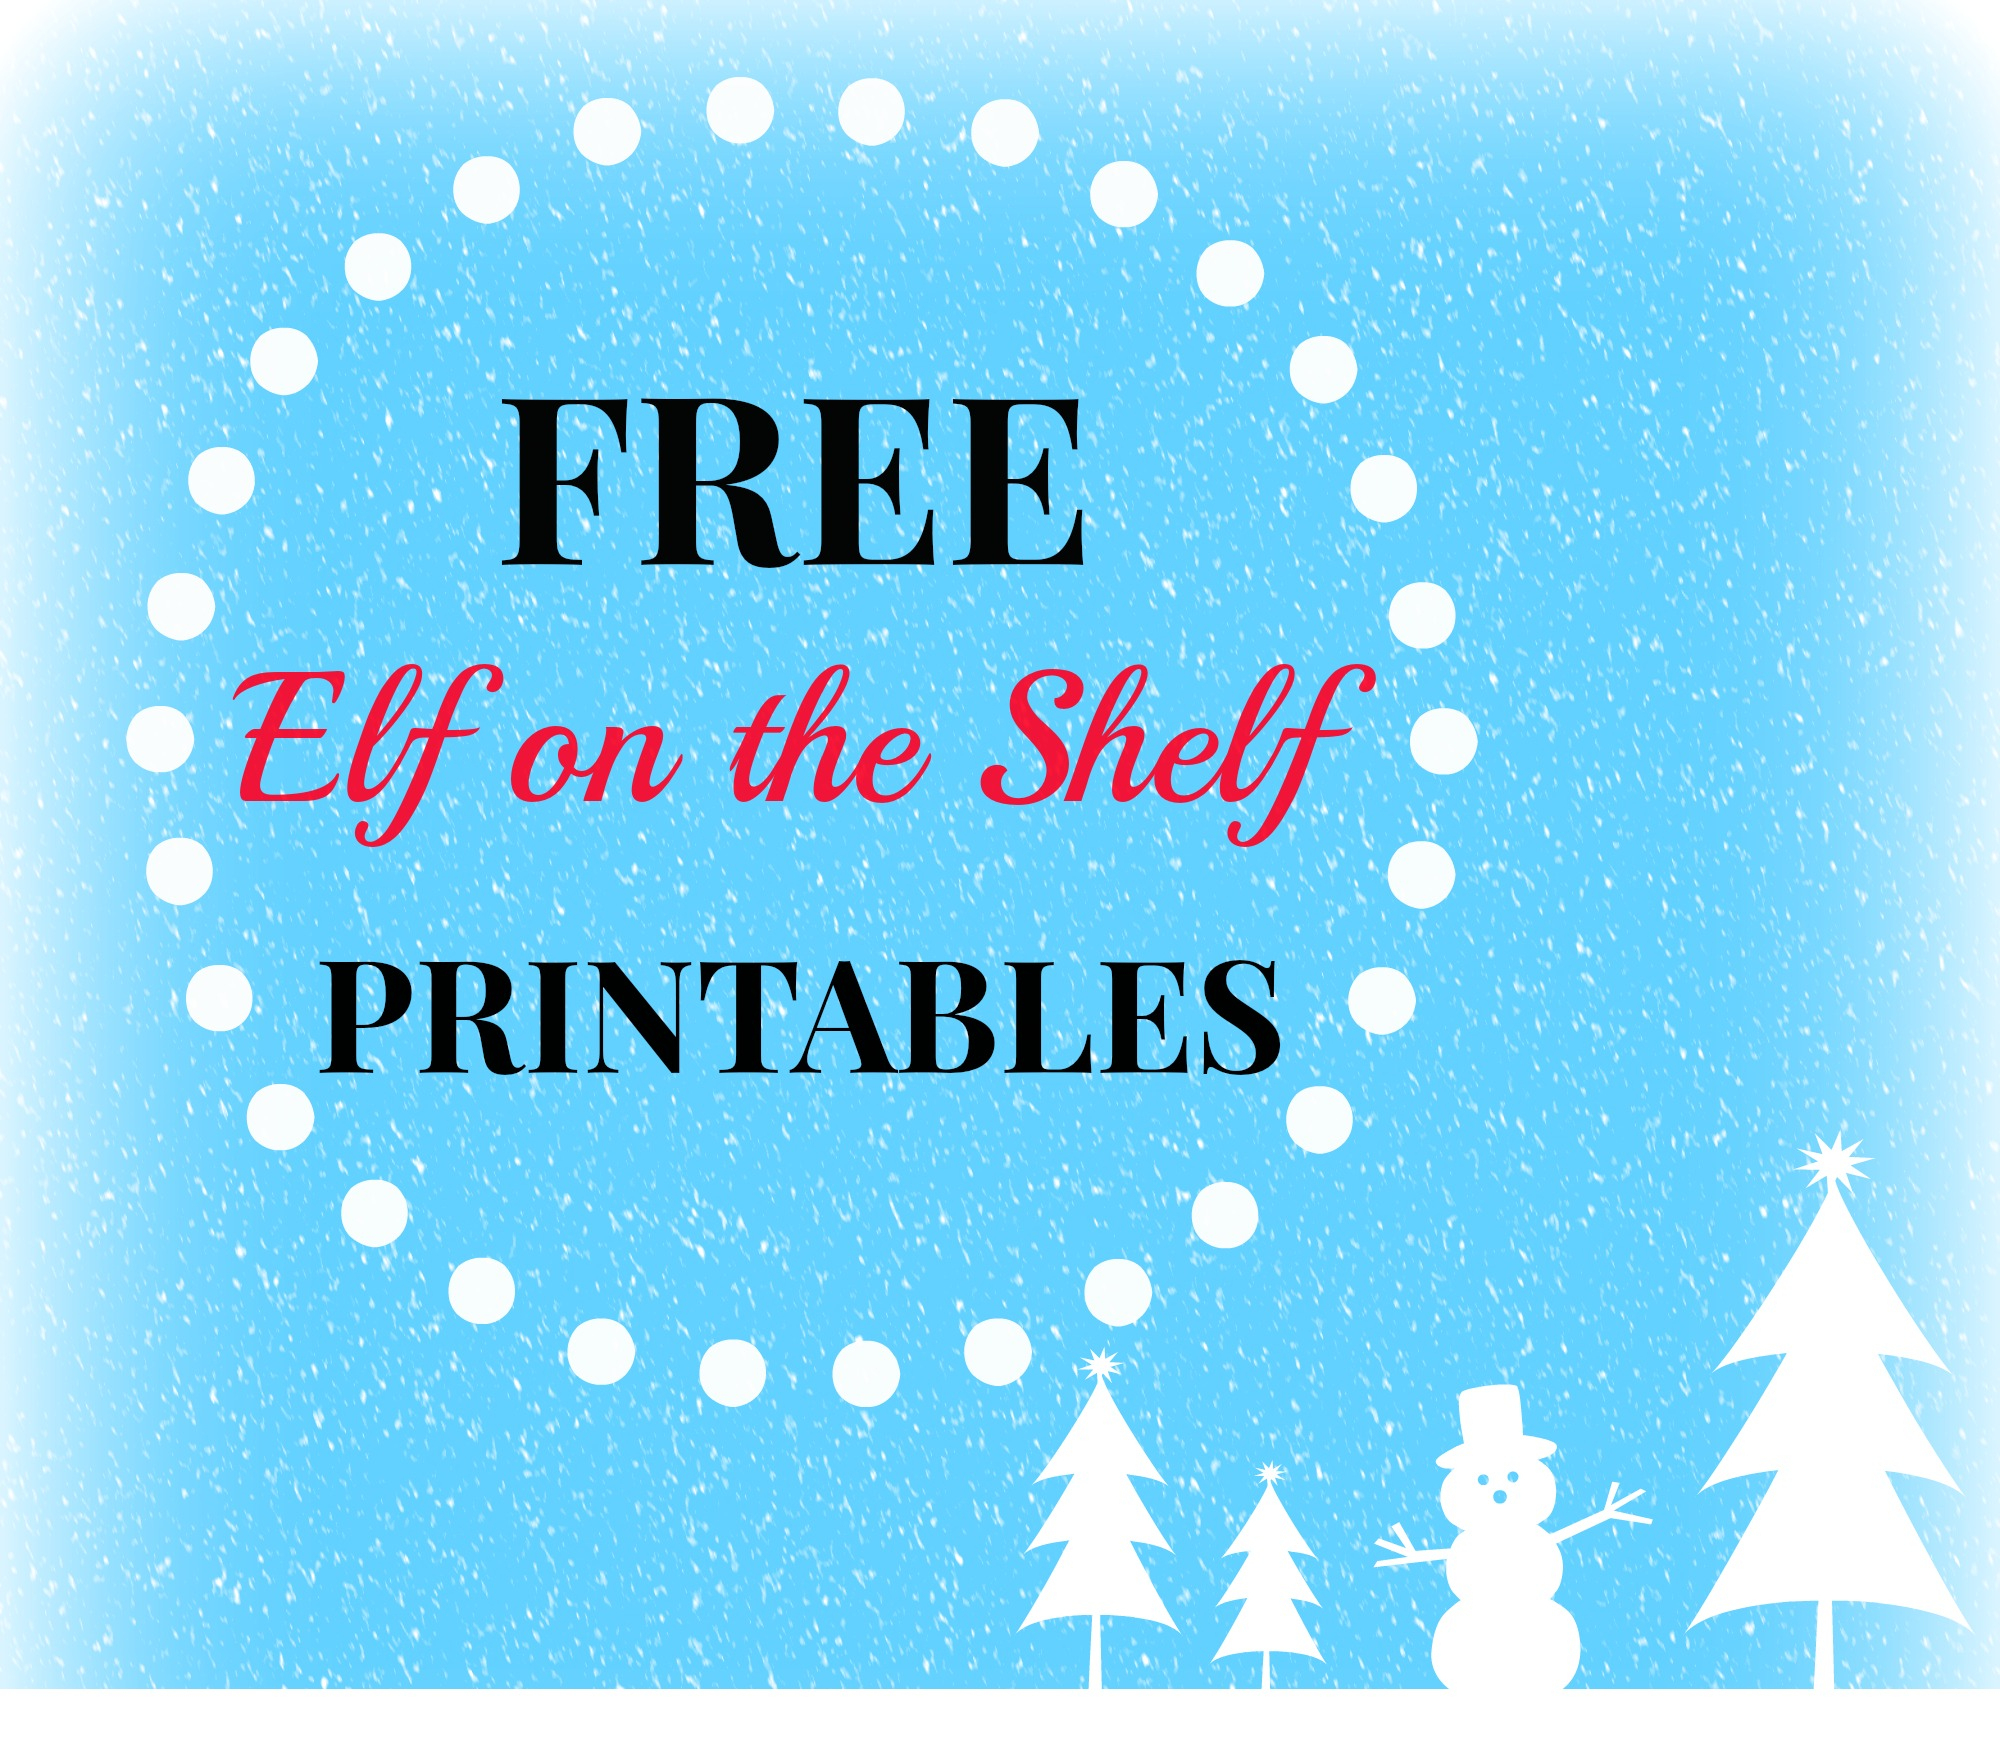 Free Elf On The Shelf Printables – Style With Nancy - Elf On The Shelf Kissing Booth Free Printable